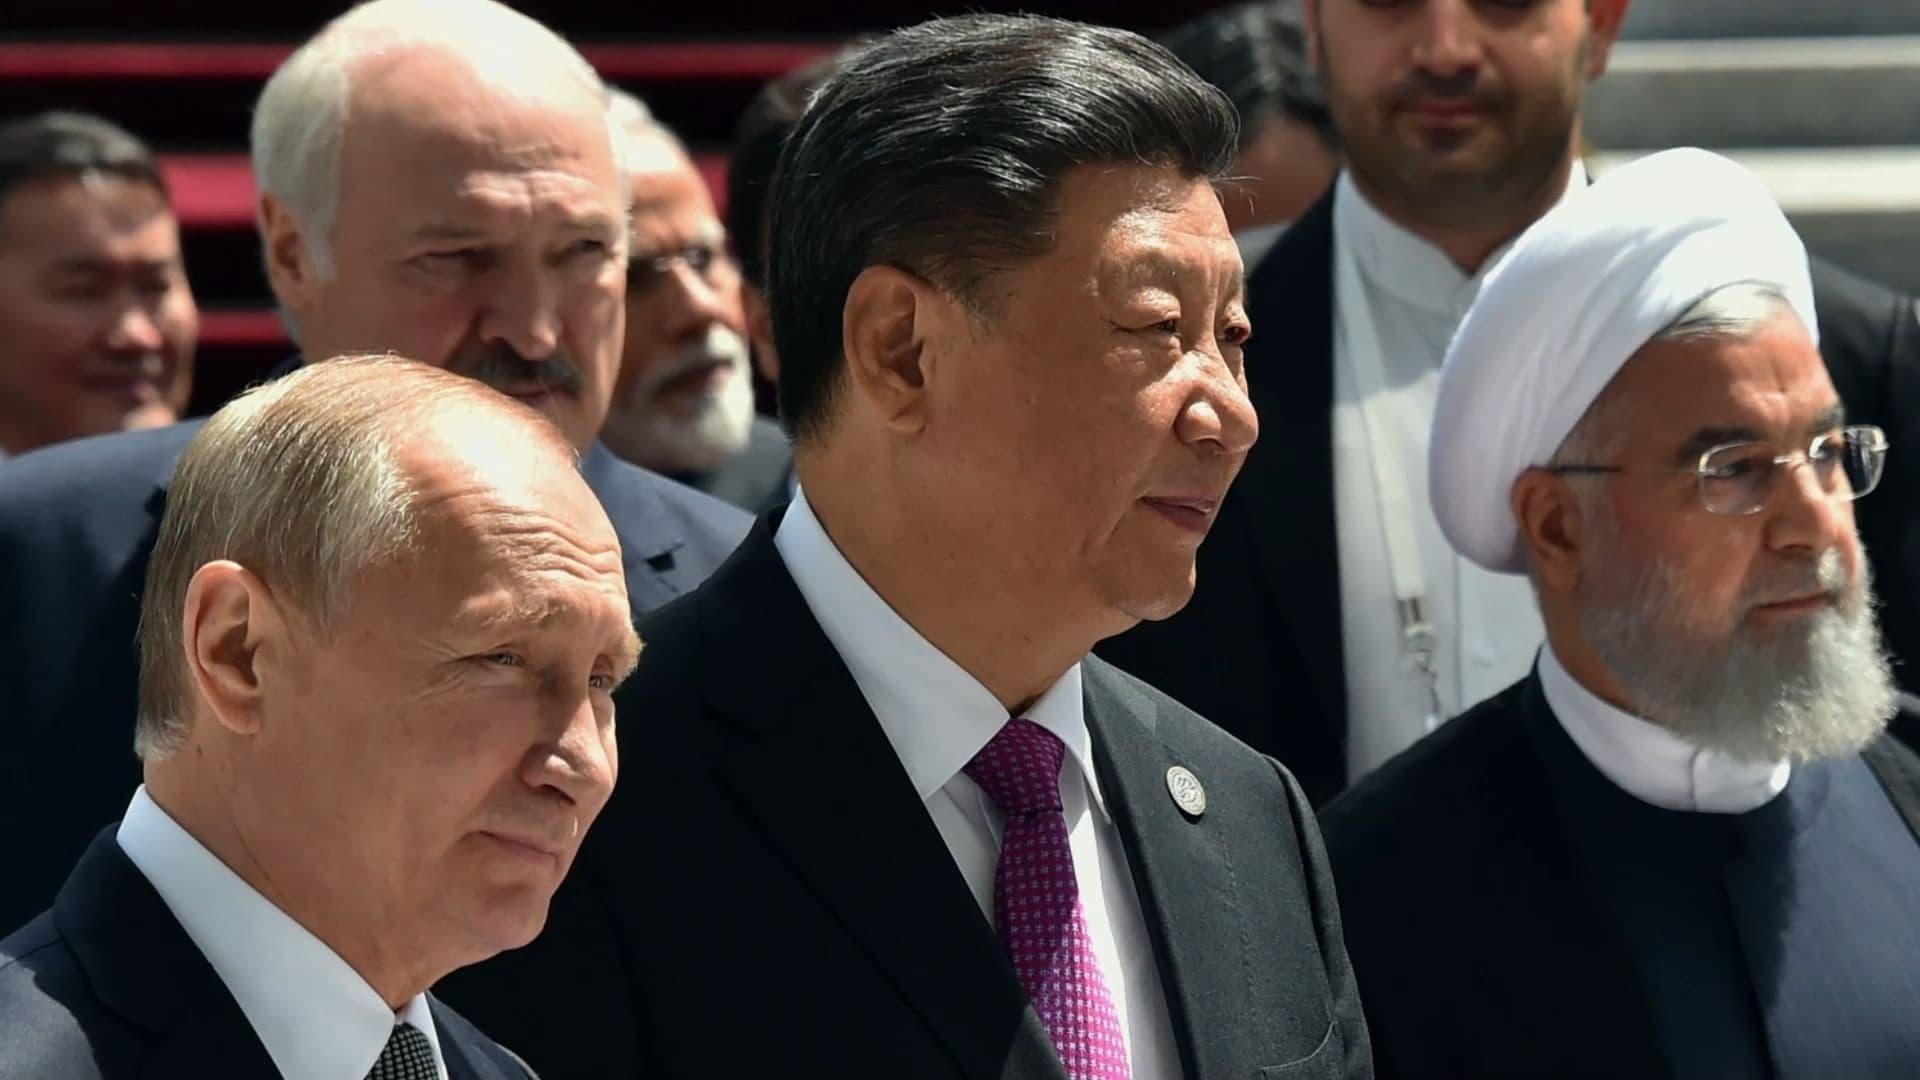 Russia, China, Iran: The Axis of Revenge backdrop